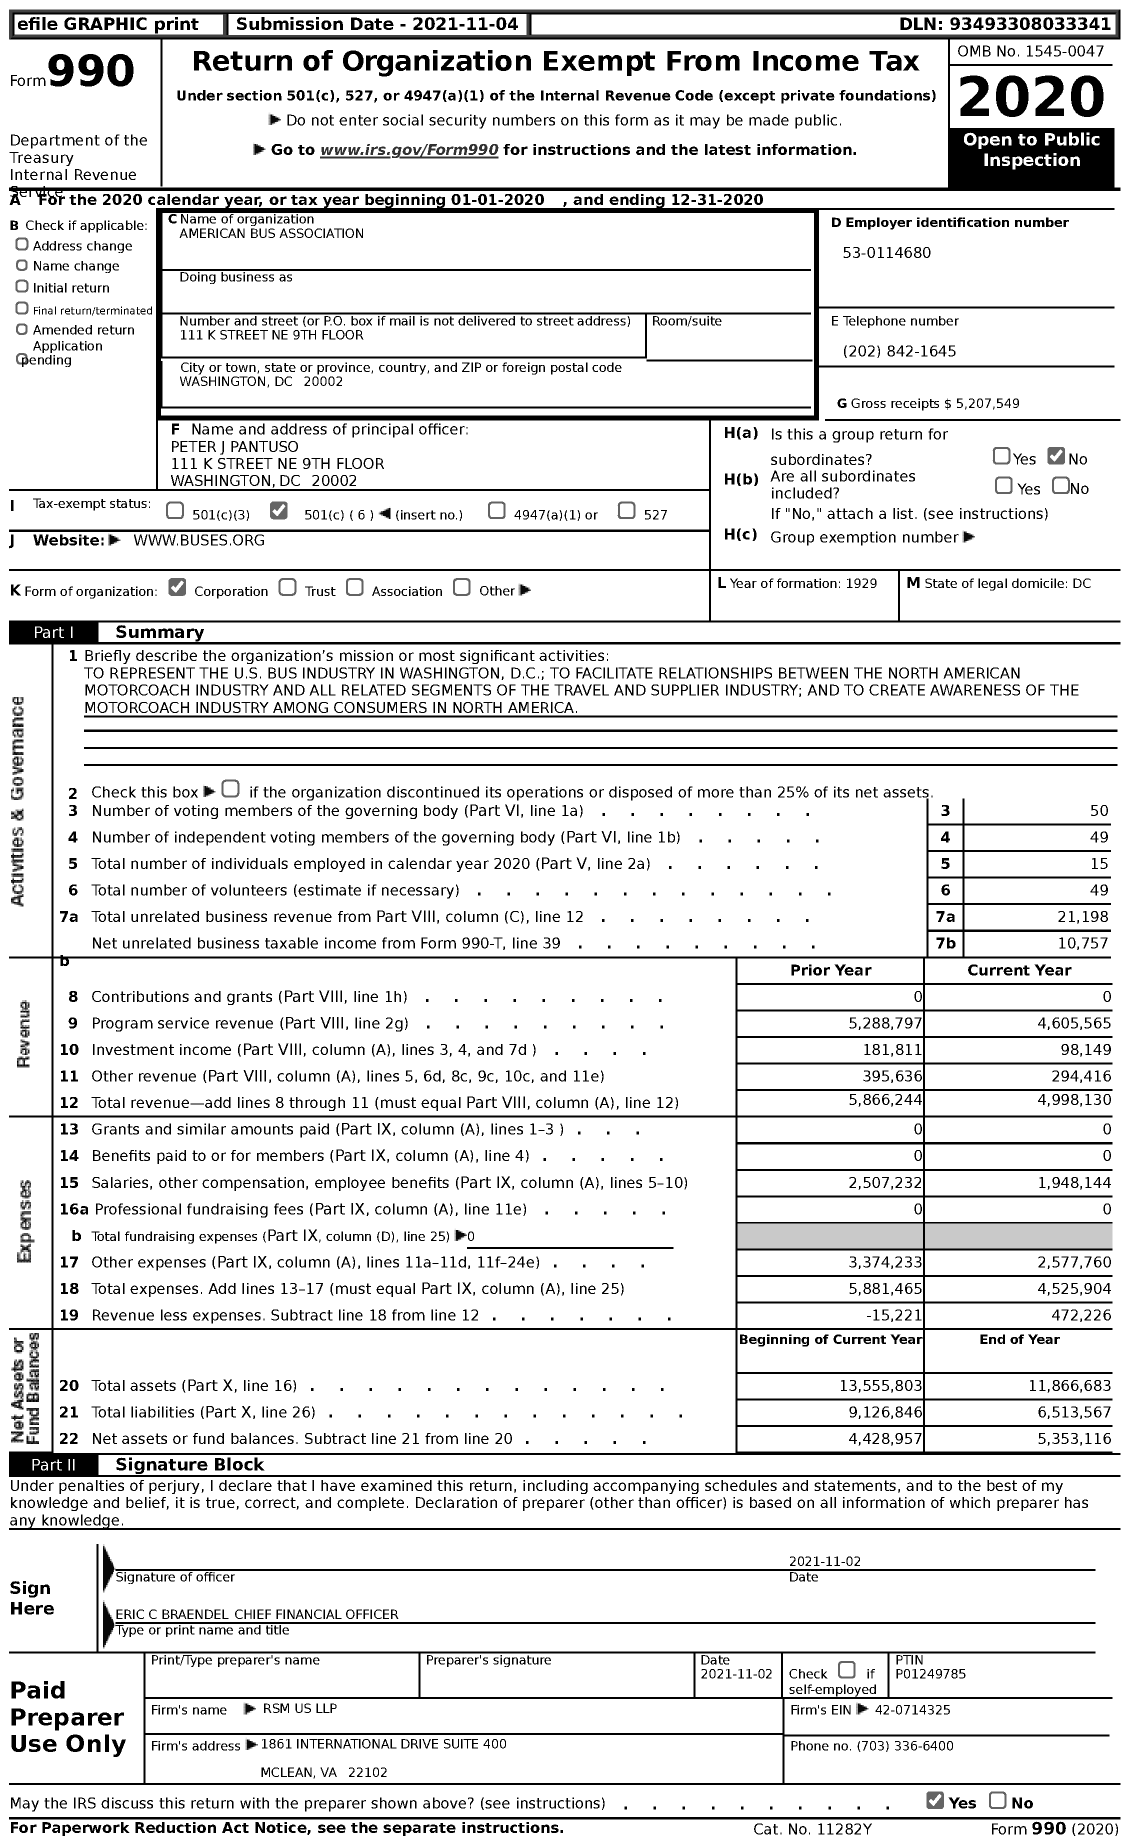 Image of first page of 2020 Form 990 for American Bus Association (ABA)